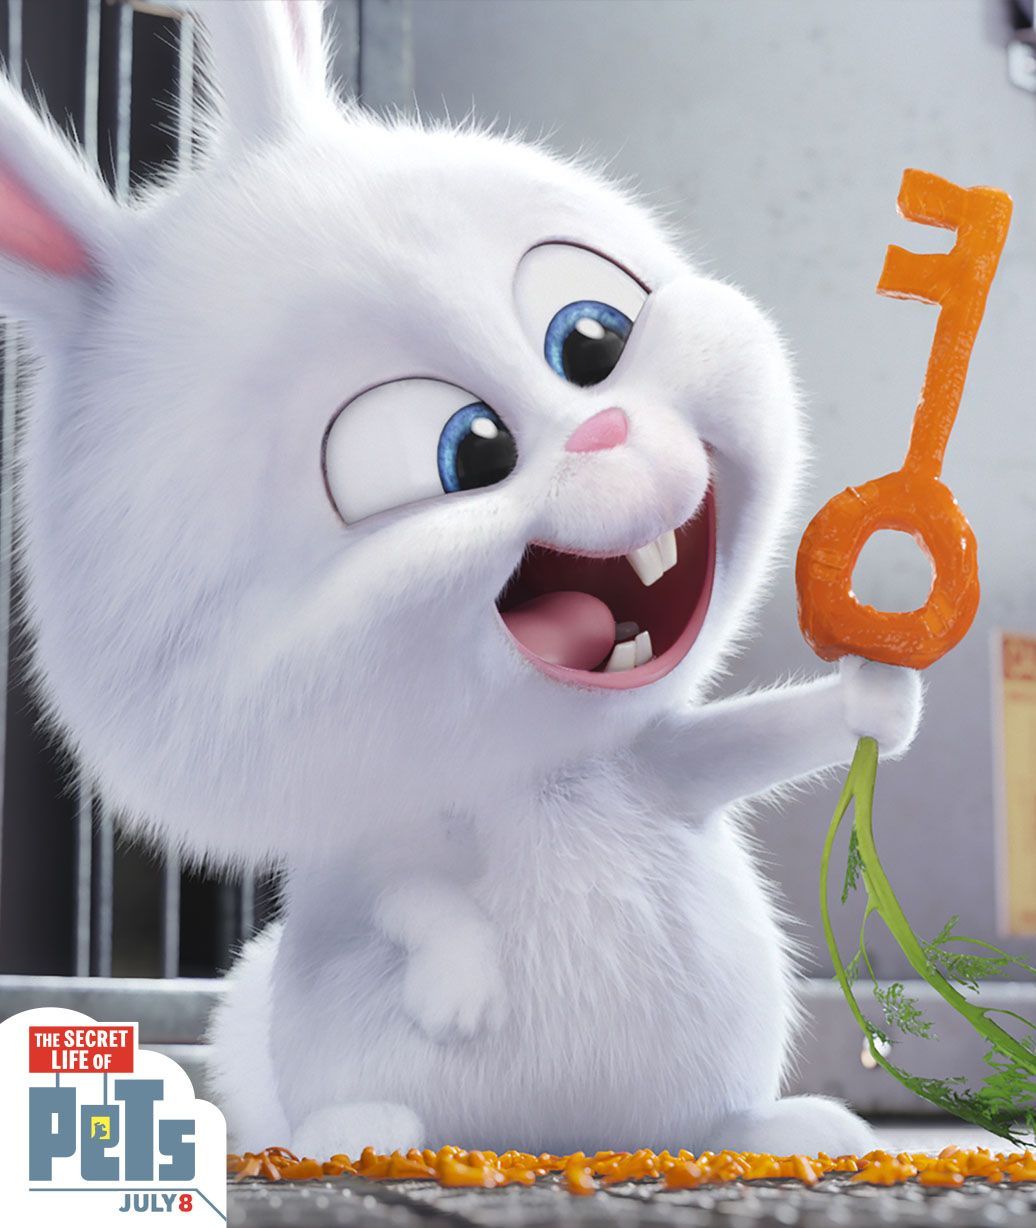 Snowball the rabbit tries DIY with this carrot key. The Secret Life of Pets. In Theaters July 8. Cartoon wallpaper, Secret life of pets, Pets movie